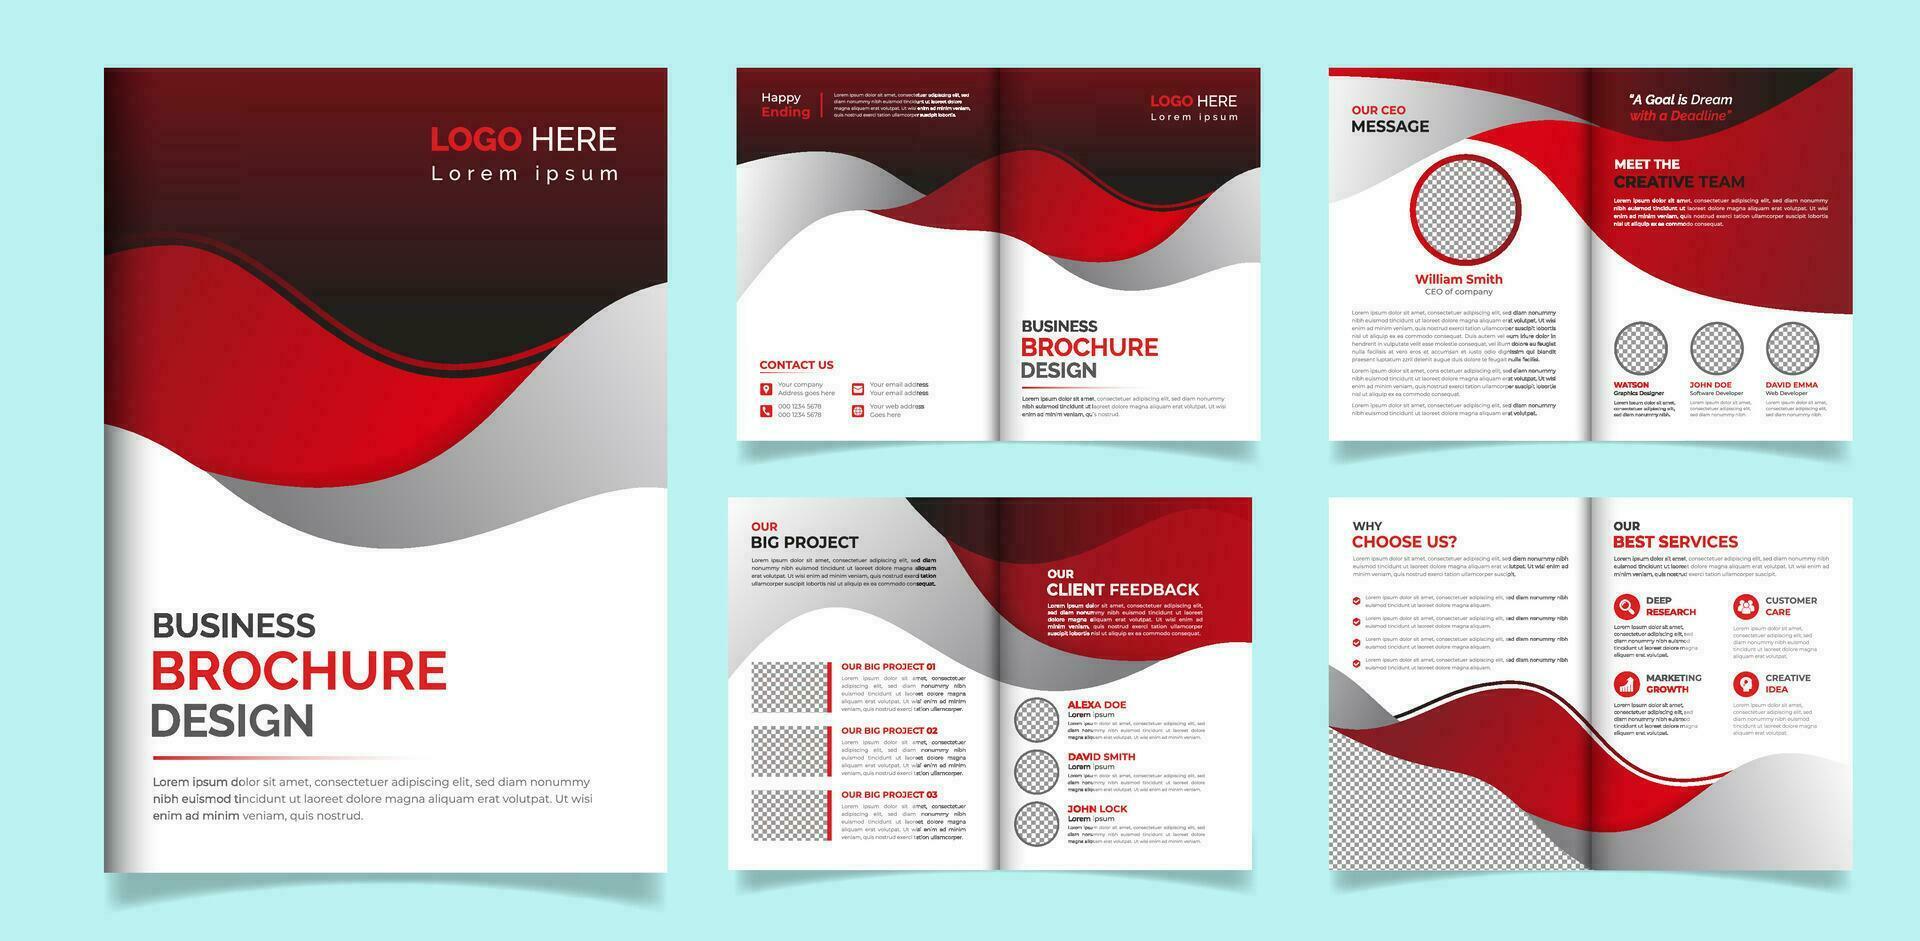 Professional and Minimalist Corporate Business Brochure Design Template vector